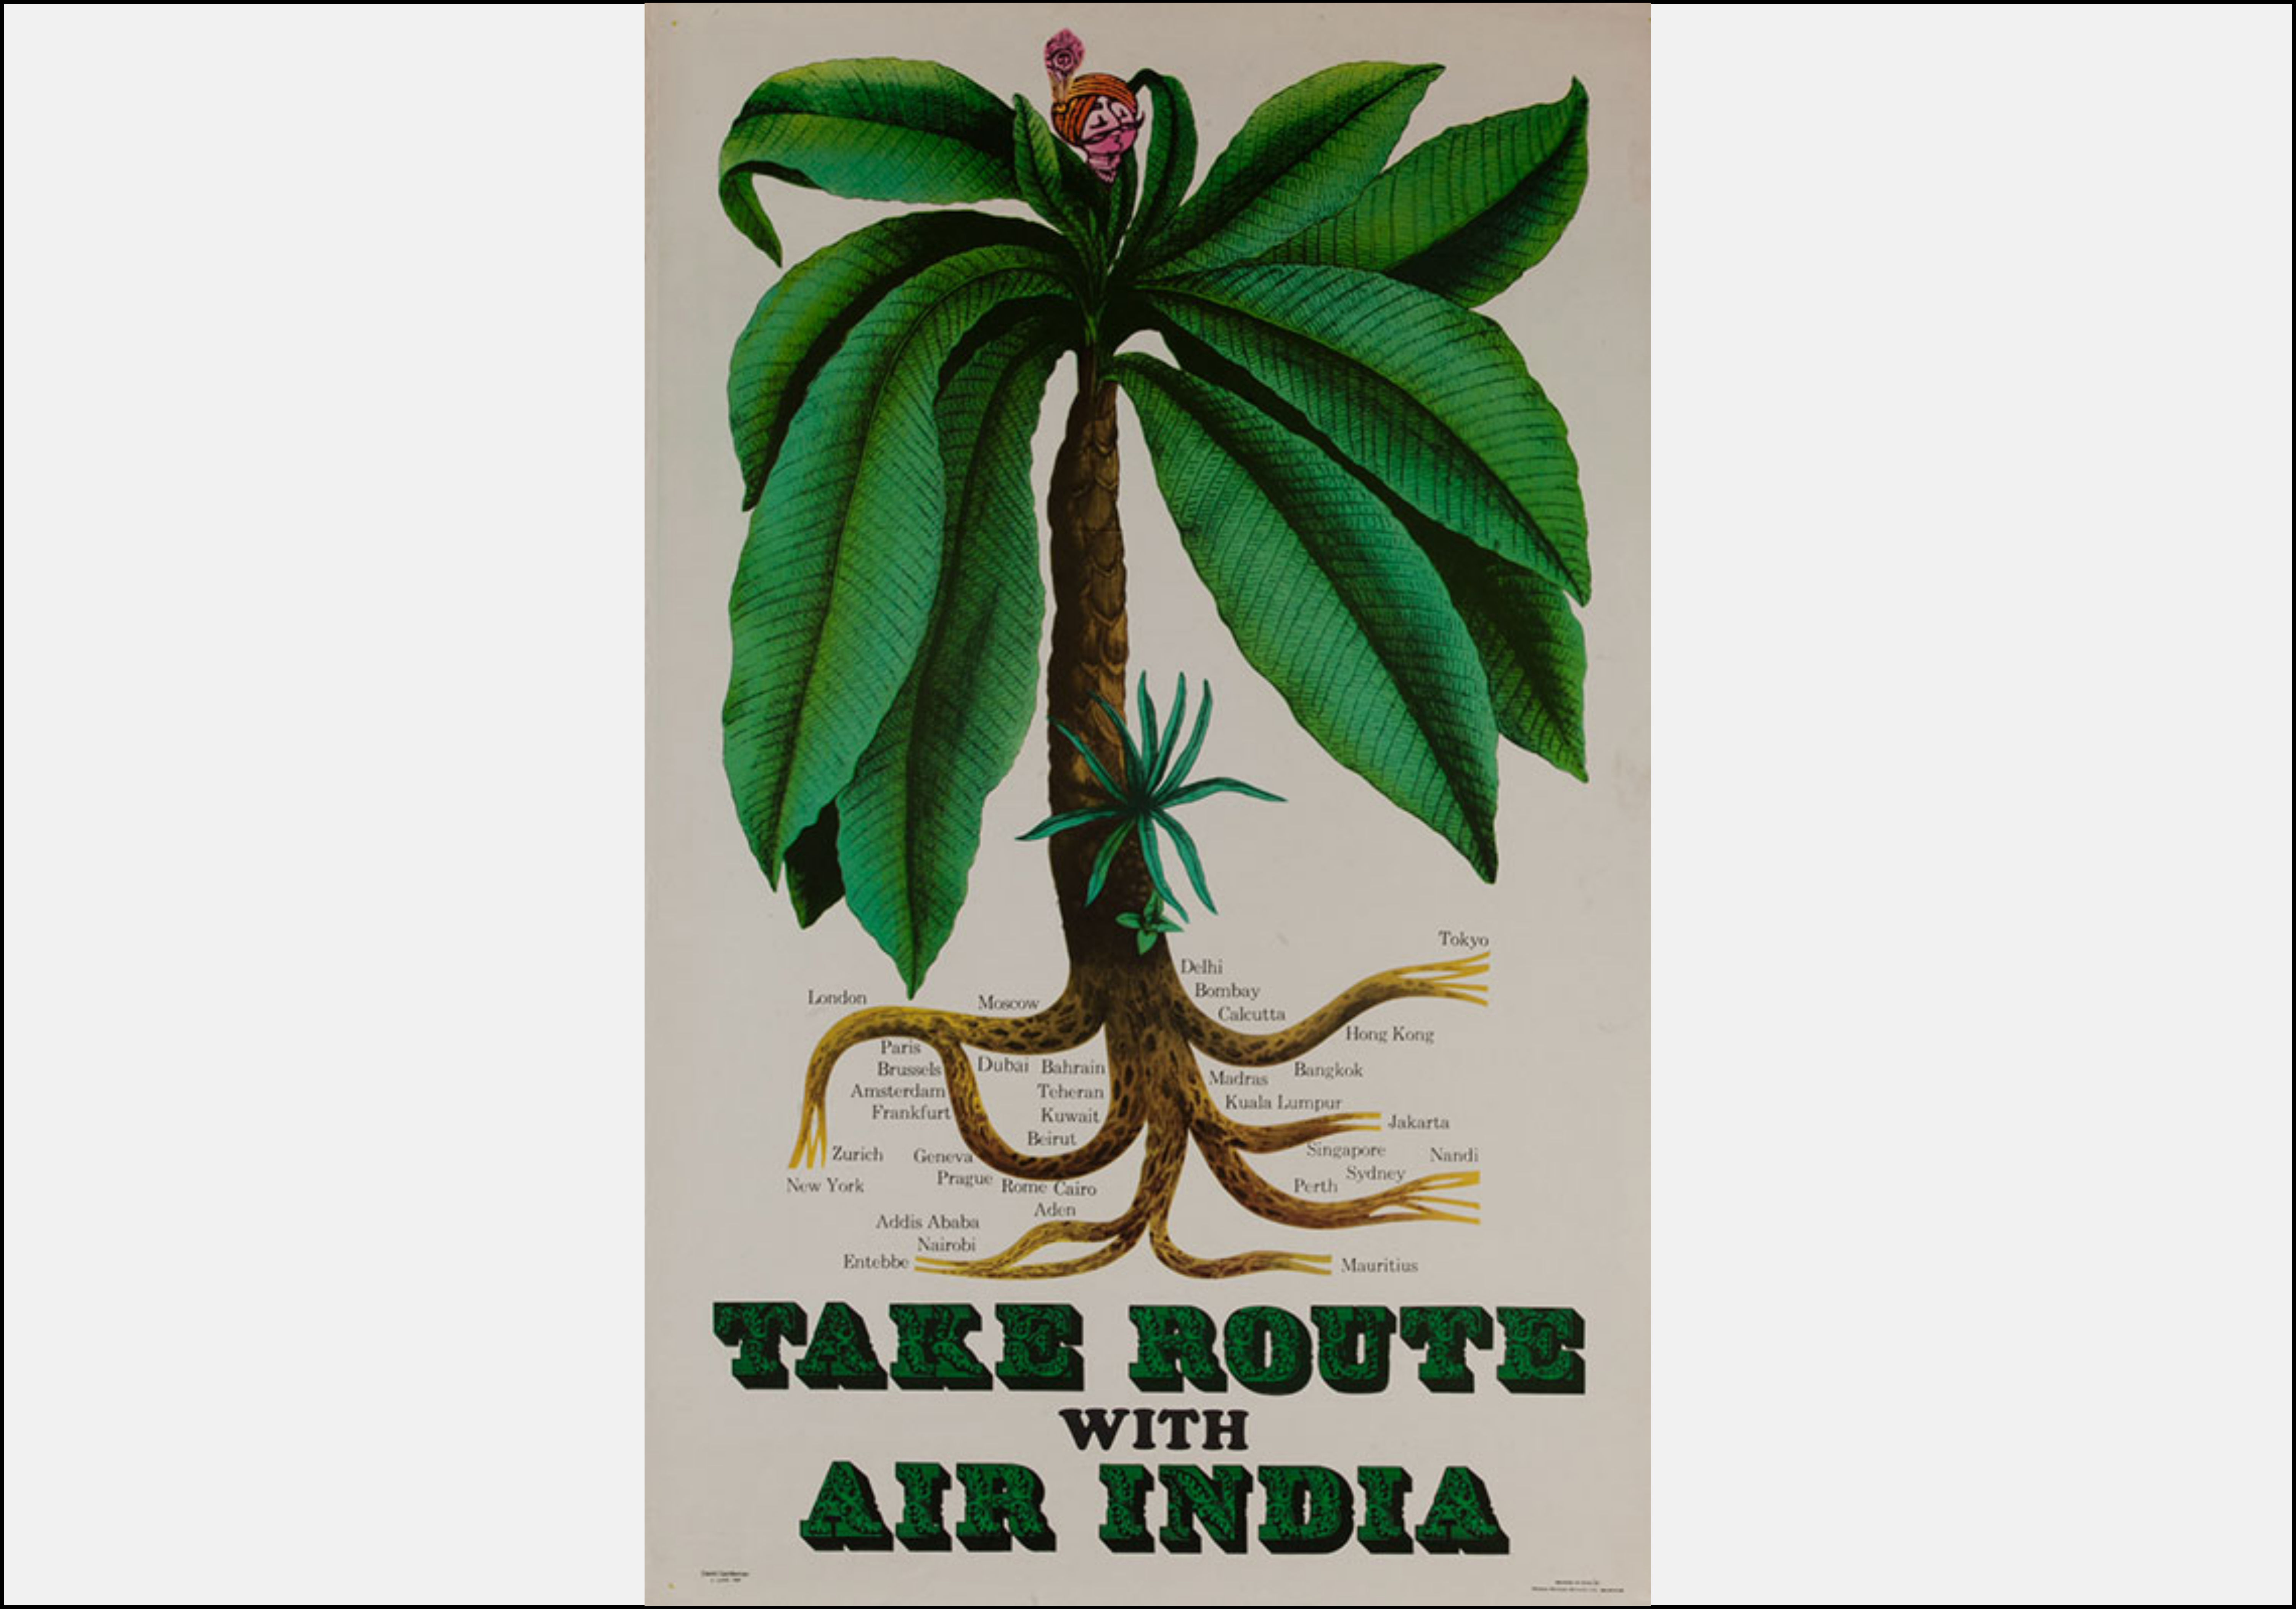 Take Route With Air India